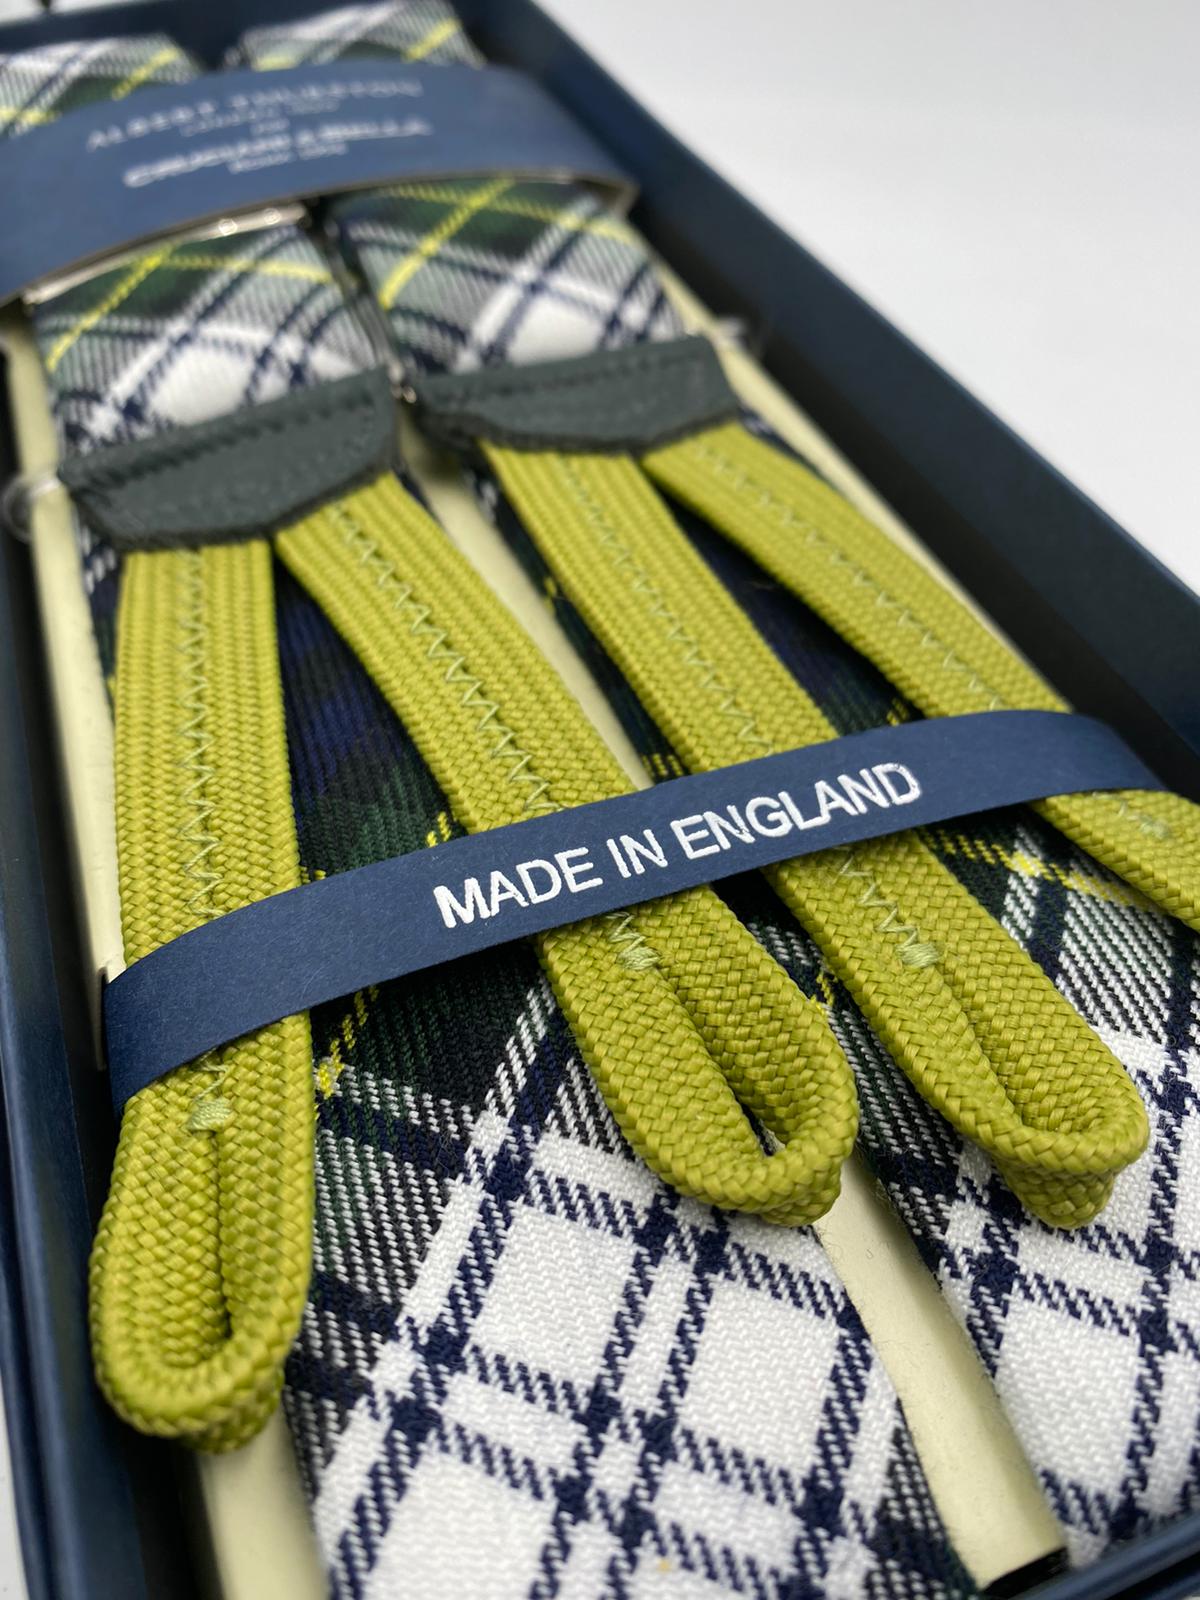 Albert Thurston for Cruciani & Bella Made in England Braid End Adjustable Sizing 40 mm wool braces Green and White Tartan Y-Shaped Nickel Fittings Size: L #0237